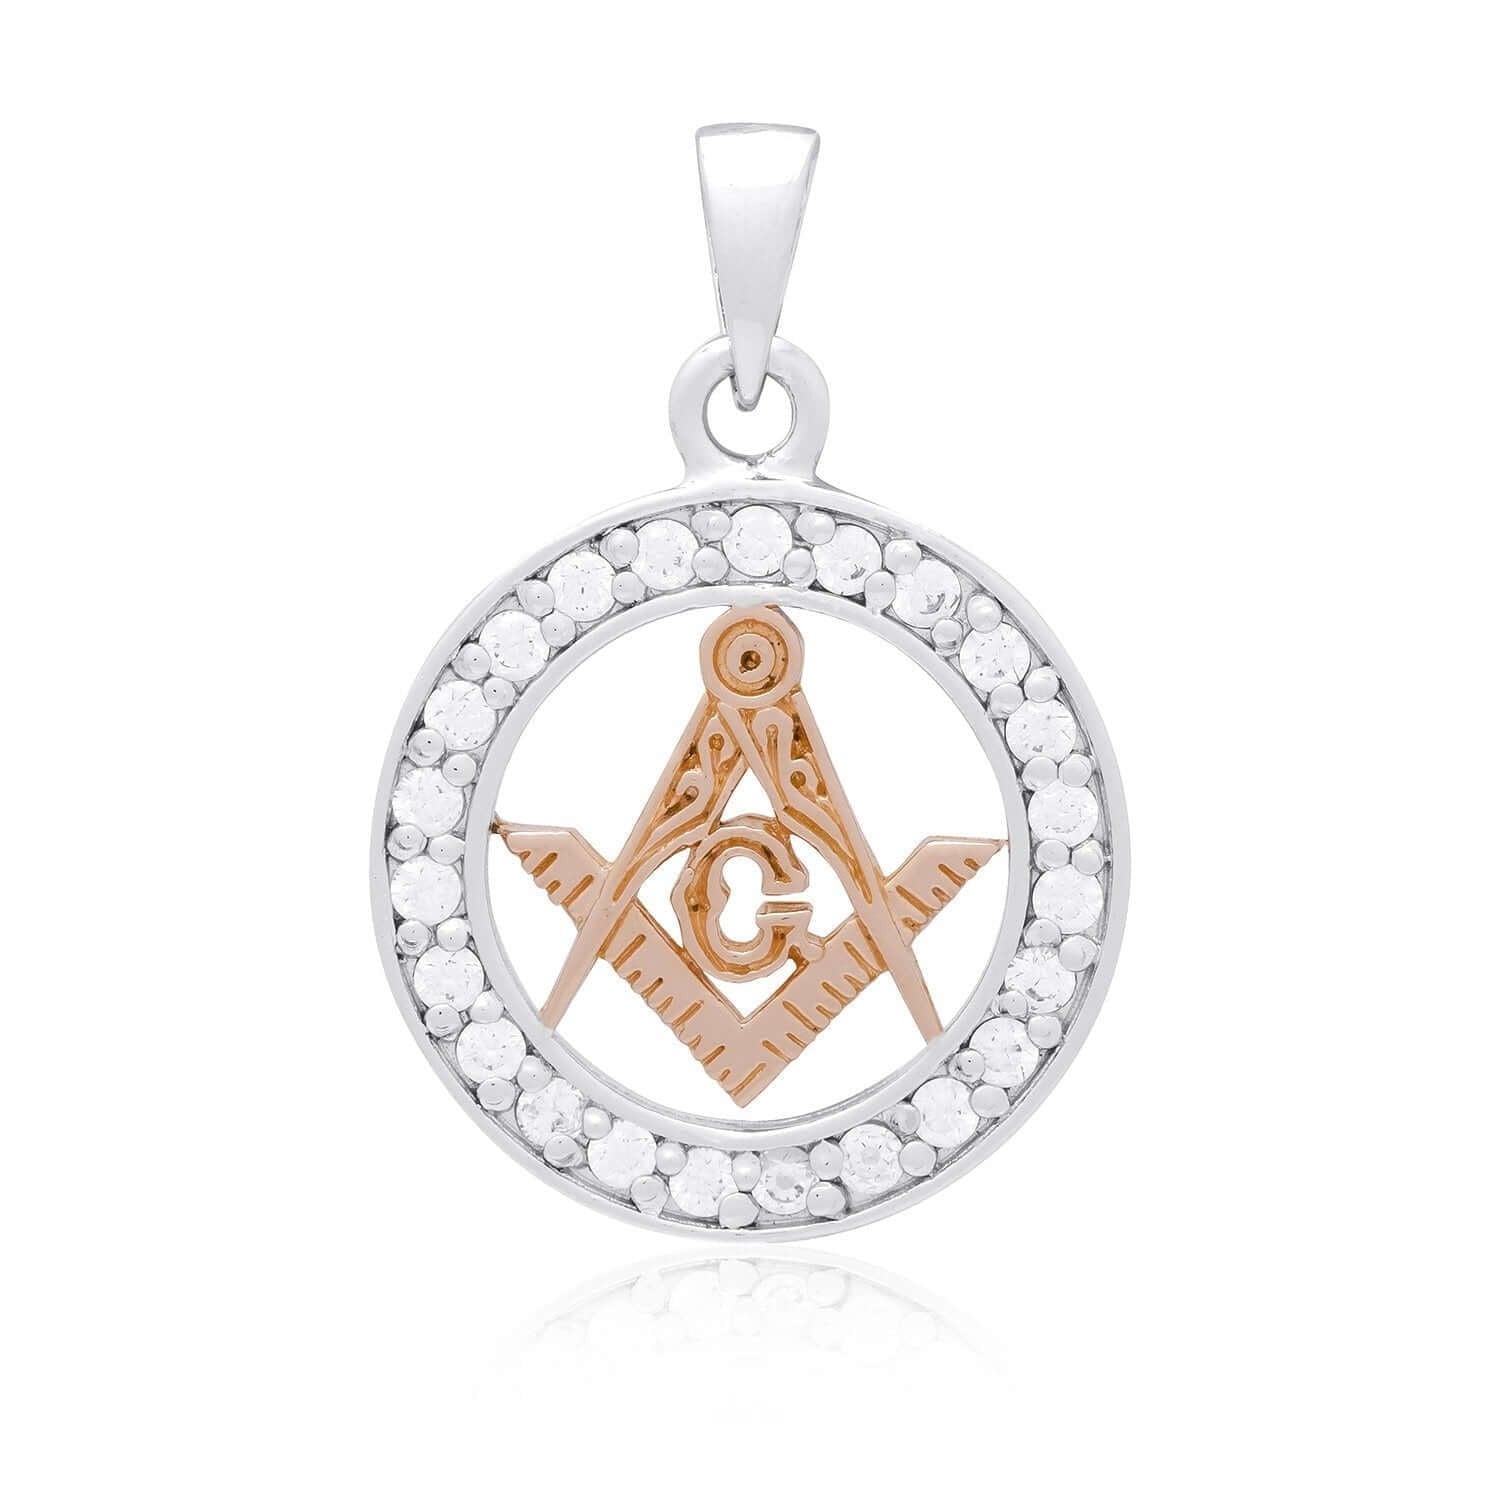 925 Sterling Silver Charm with Rose Gold Masonic Compass and Cubic Zirconia